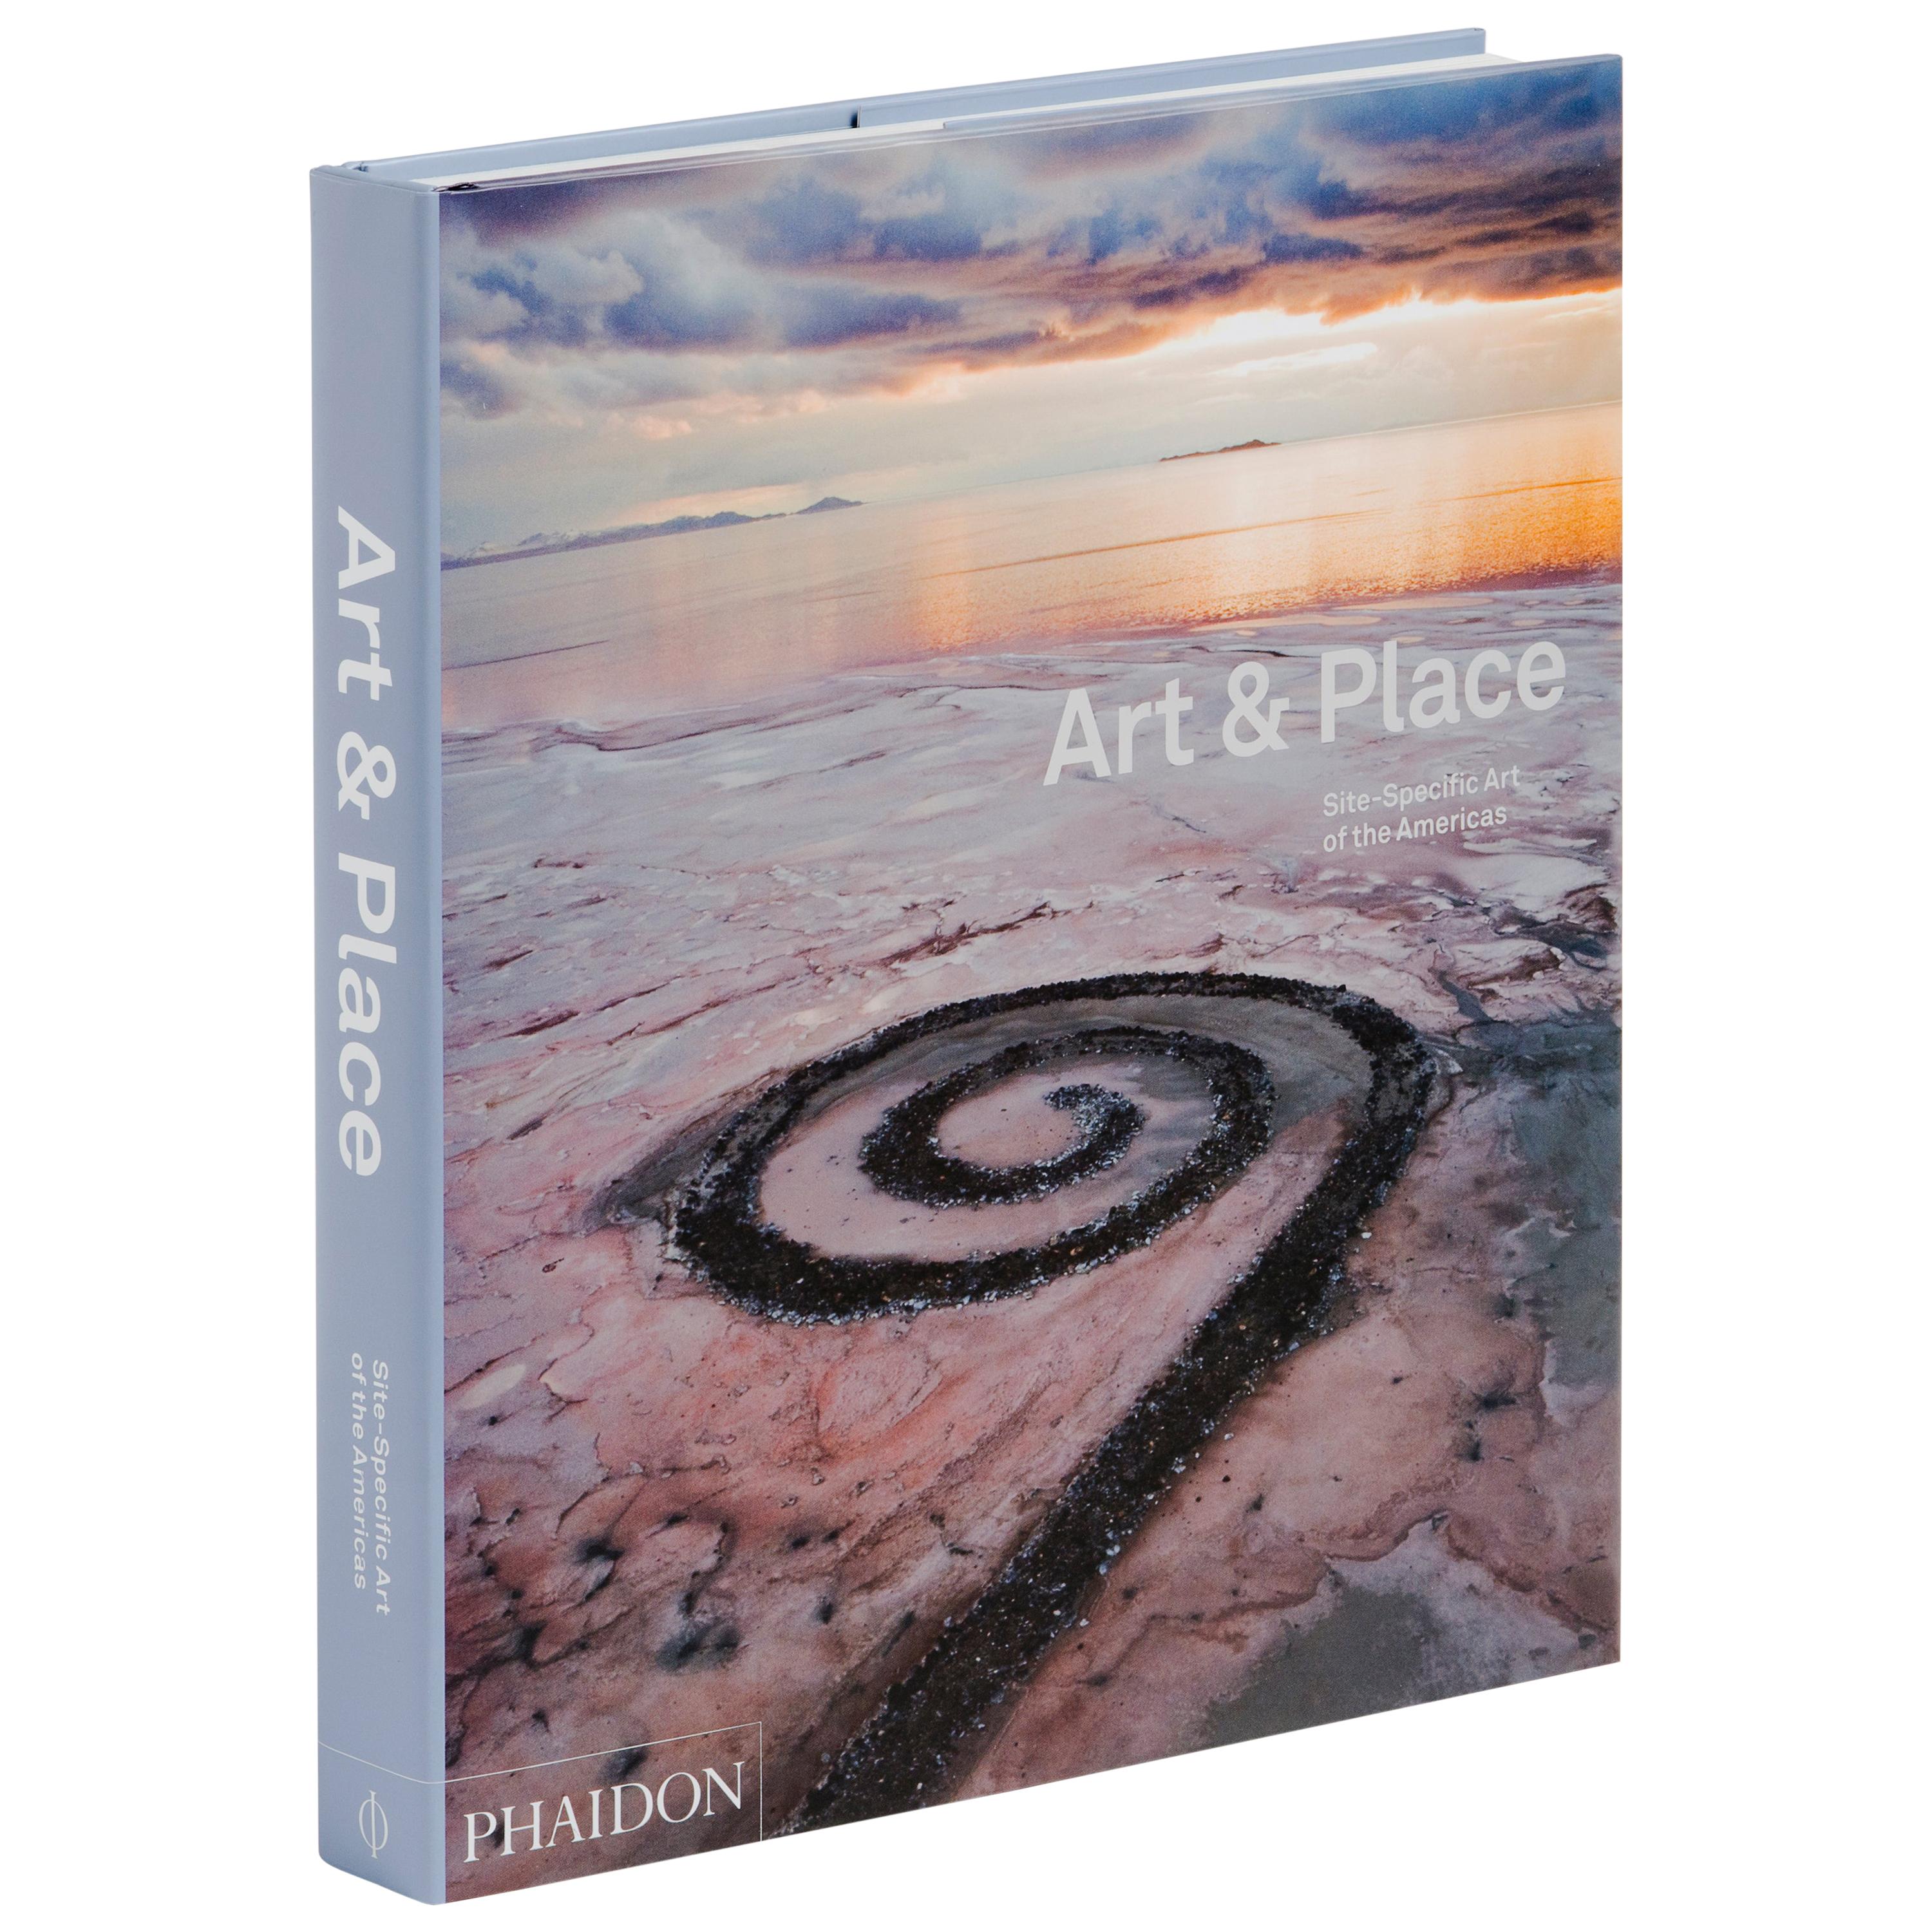 Art & Place, Site-specific Art of the Americas Book